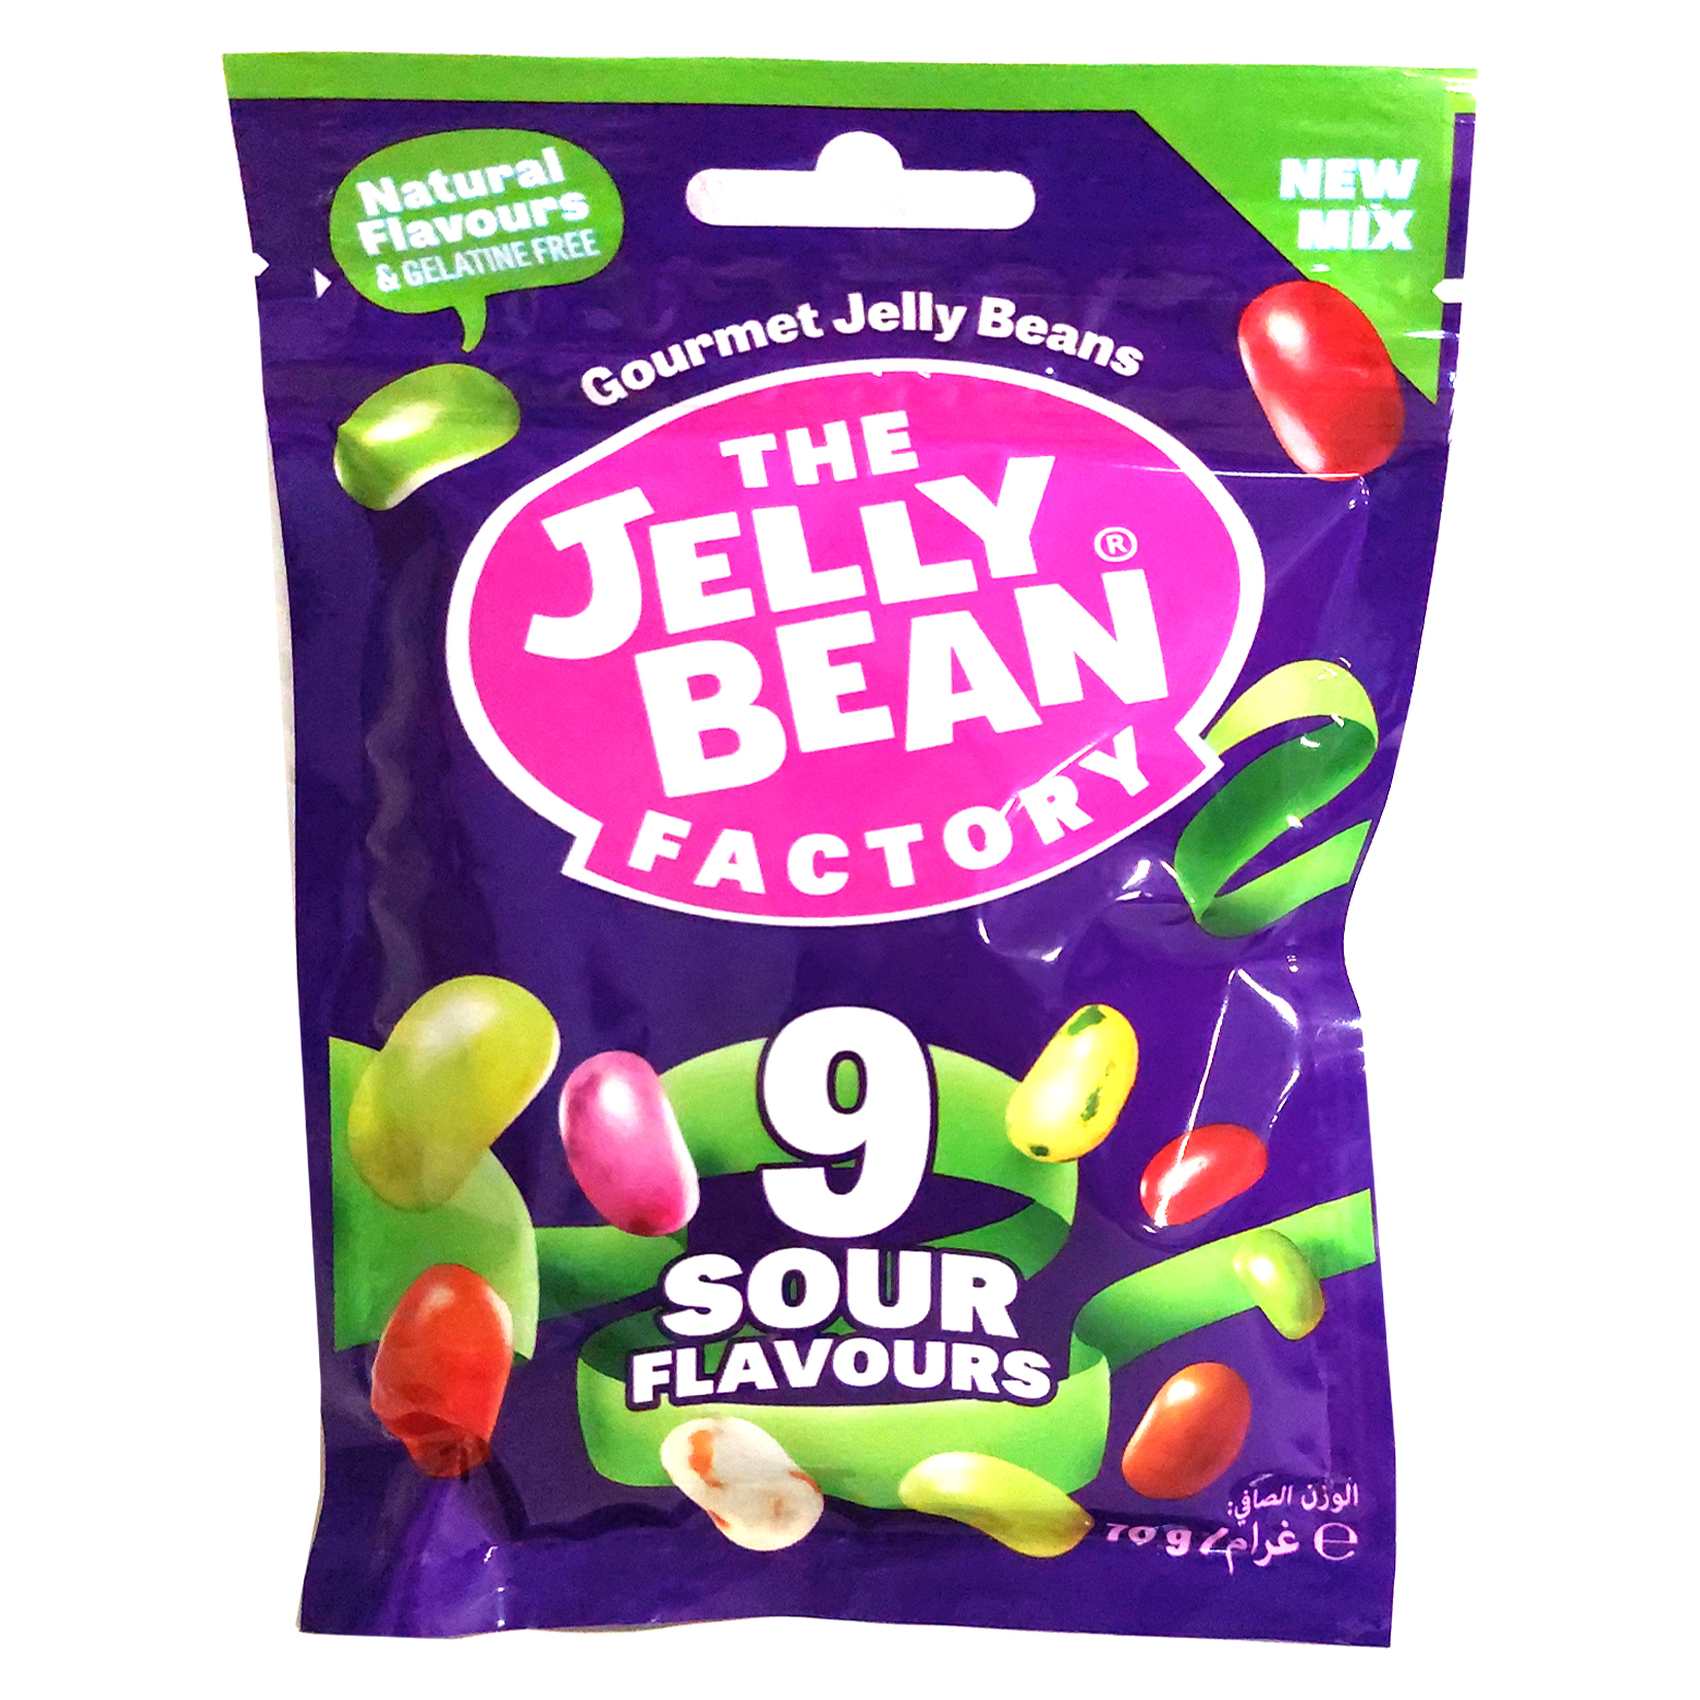 Jelly Bean Factory 9 Sour Flavours 70g